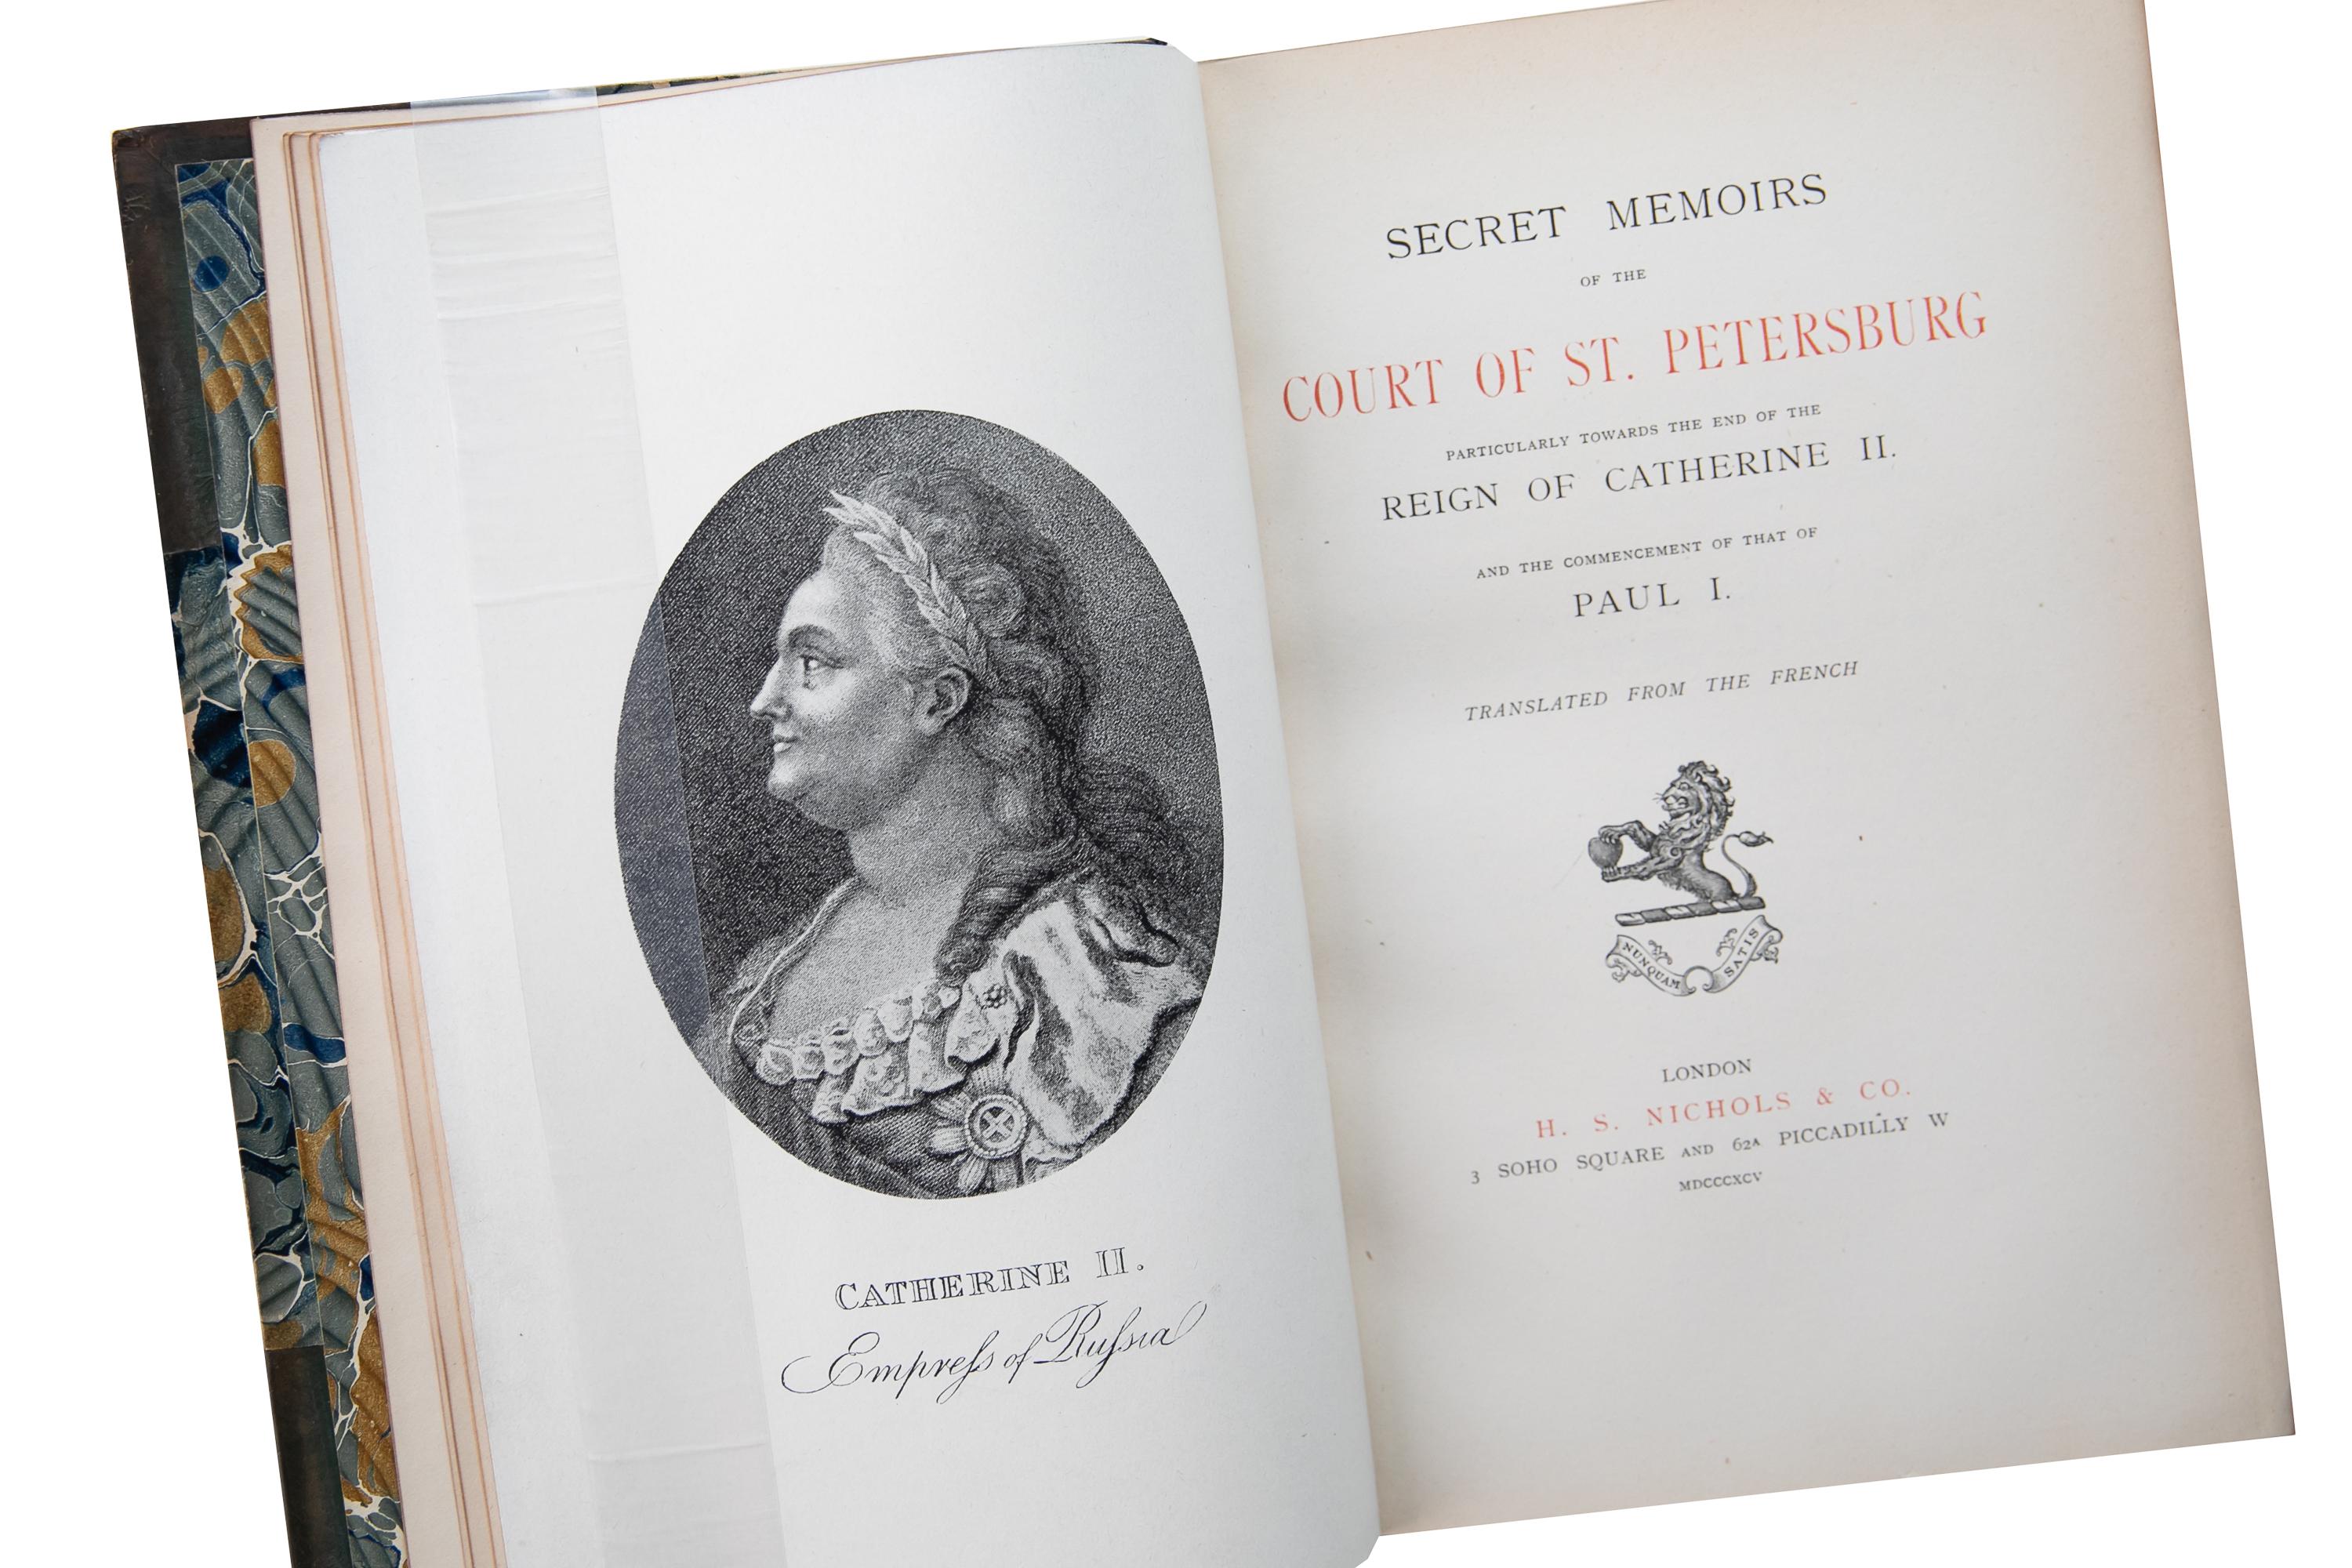 English 1 Volume. The Court of St. Petersburg, Secret Memoirs. For Sale